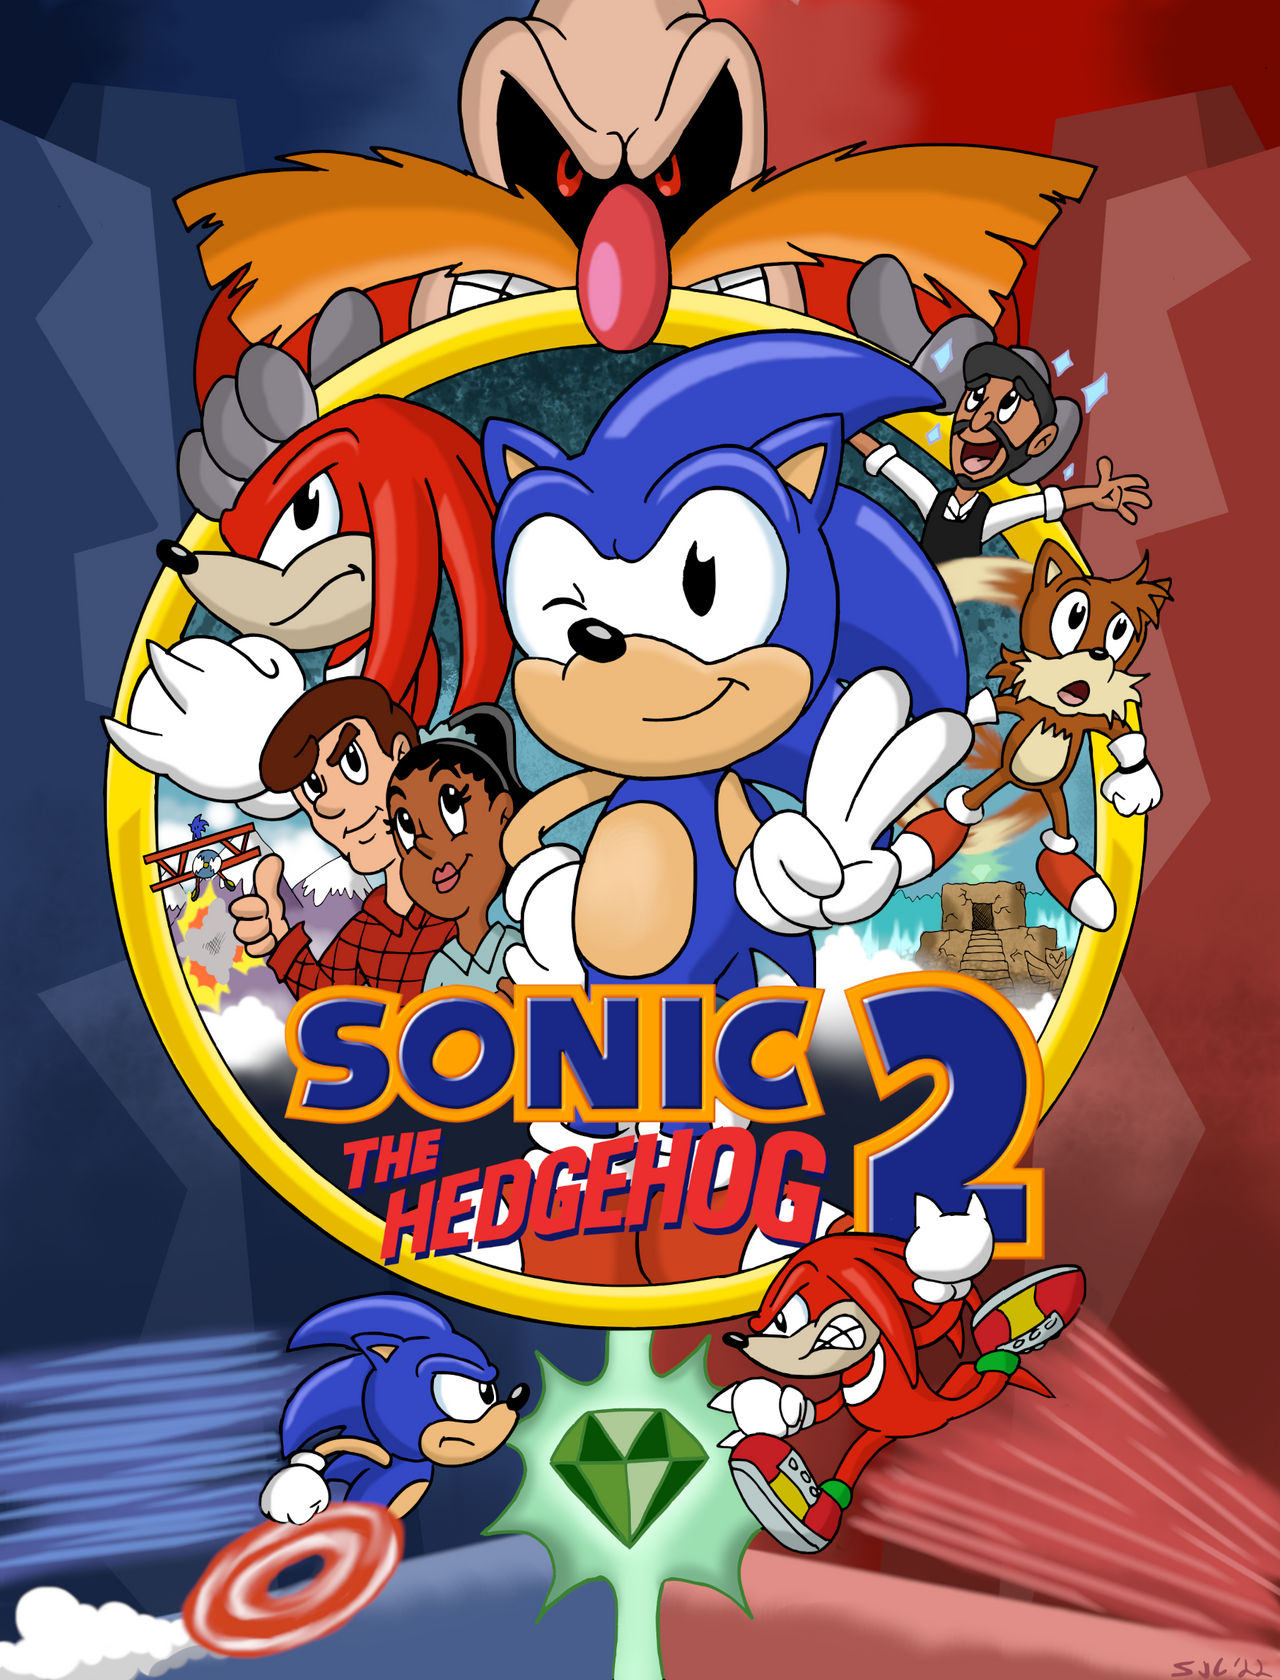 Sonic 2 Poster (Classic Style) by SonicShuffl on DeviantArt